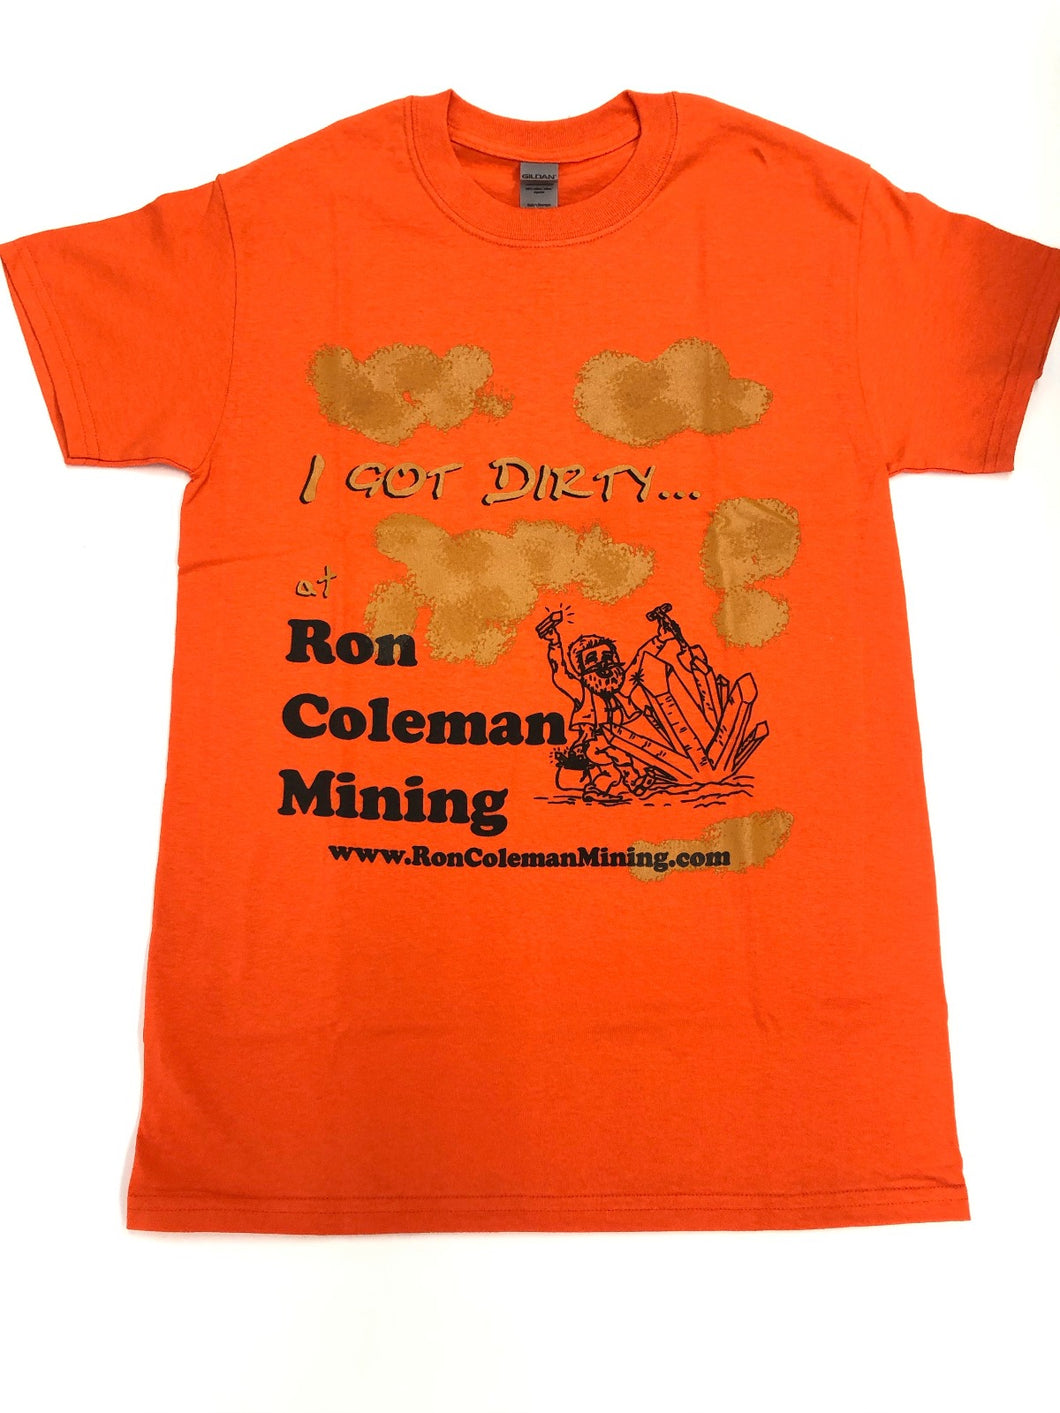 Short Sleeve Orange T Shirt With I Got Dirty At Ron Coleman Mining Graphic